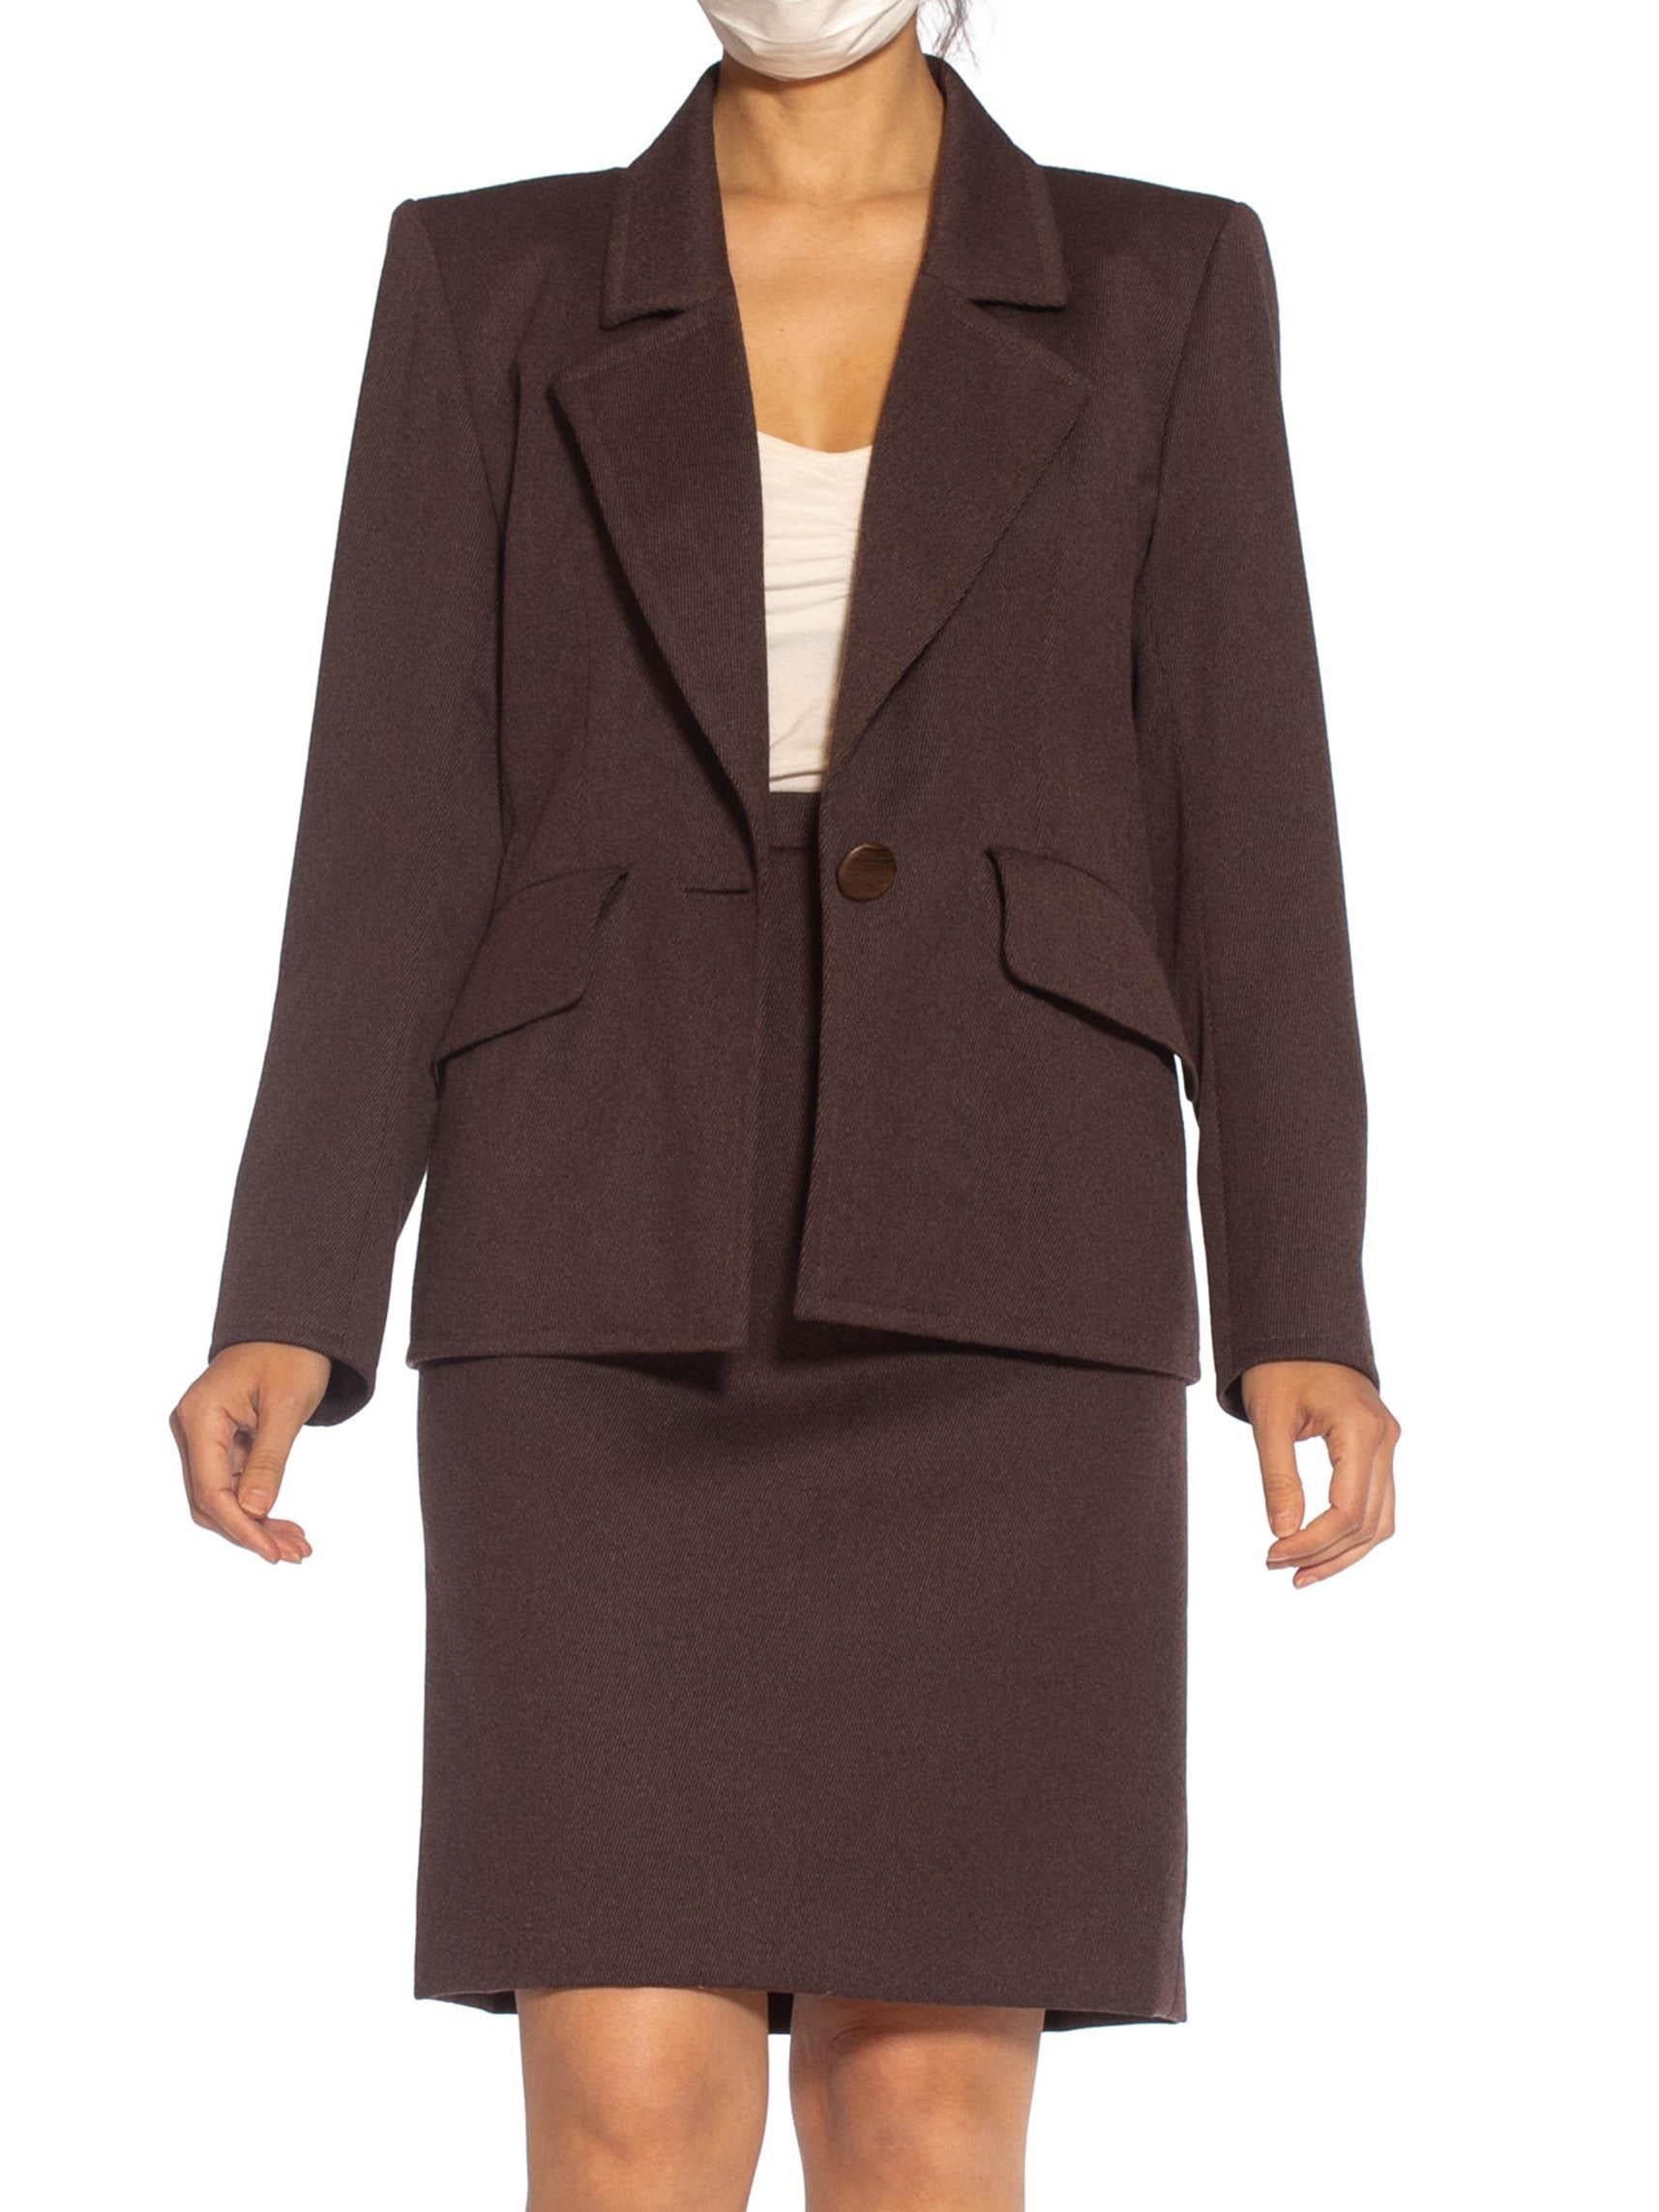 1980S YVES SAINT LAURENT Brown Haute Couture Wool Skirt Suit For Sale 2